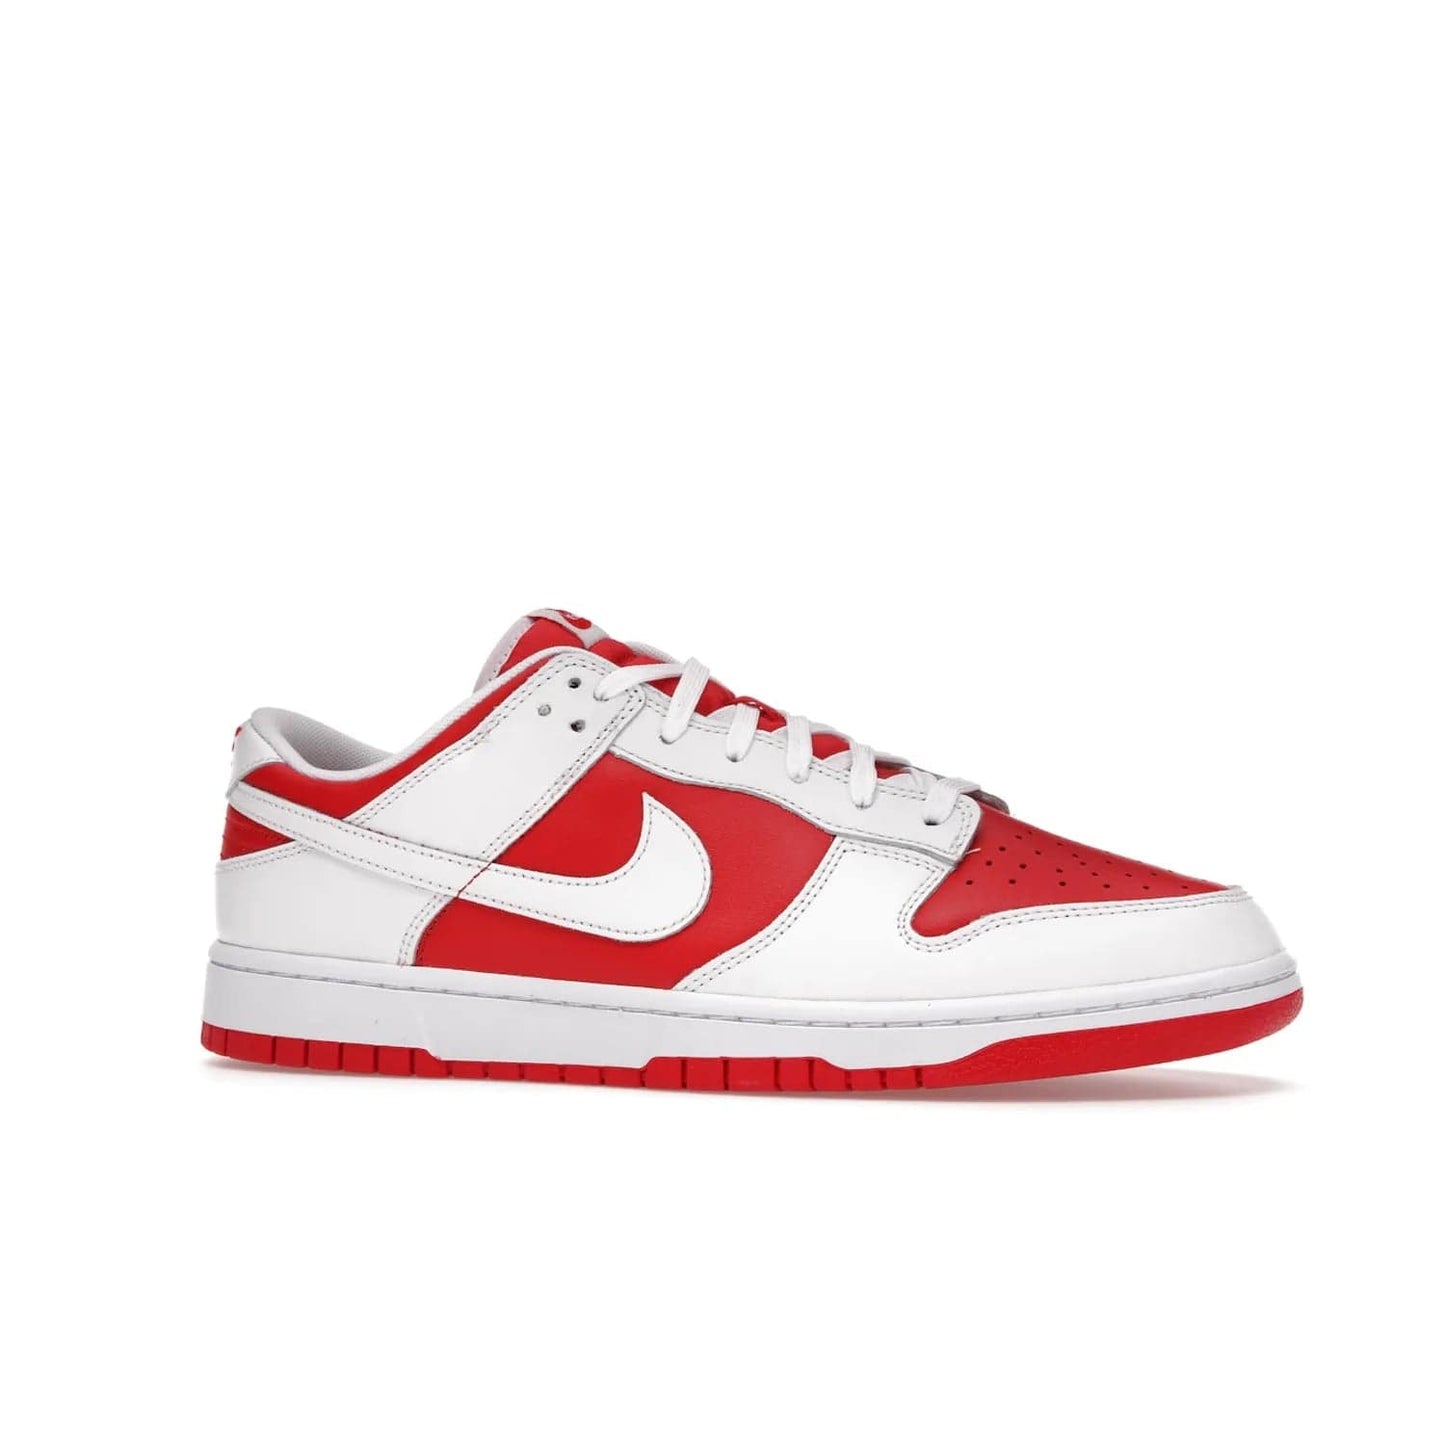 Nike Dunk Low Championship Red (2021) - Image 3 - Only at www.BallersClubKickz.com - A bold and stylish Nike Dunk Low Championship Red from 2021 with a classic retro design. University Red upper, white leather overlays and Swooshes, and a woven tongue label. Make a statement with these sleek kicks!